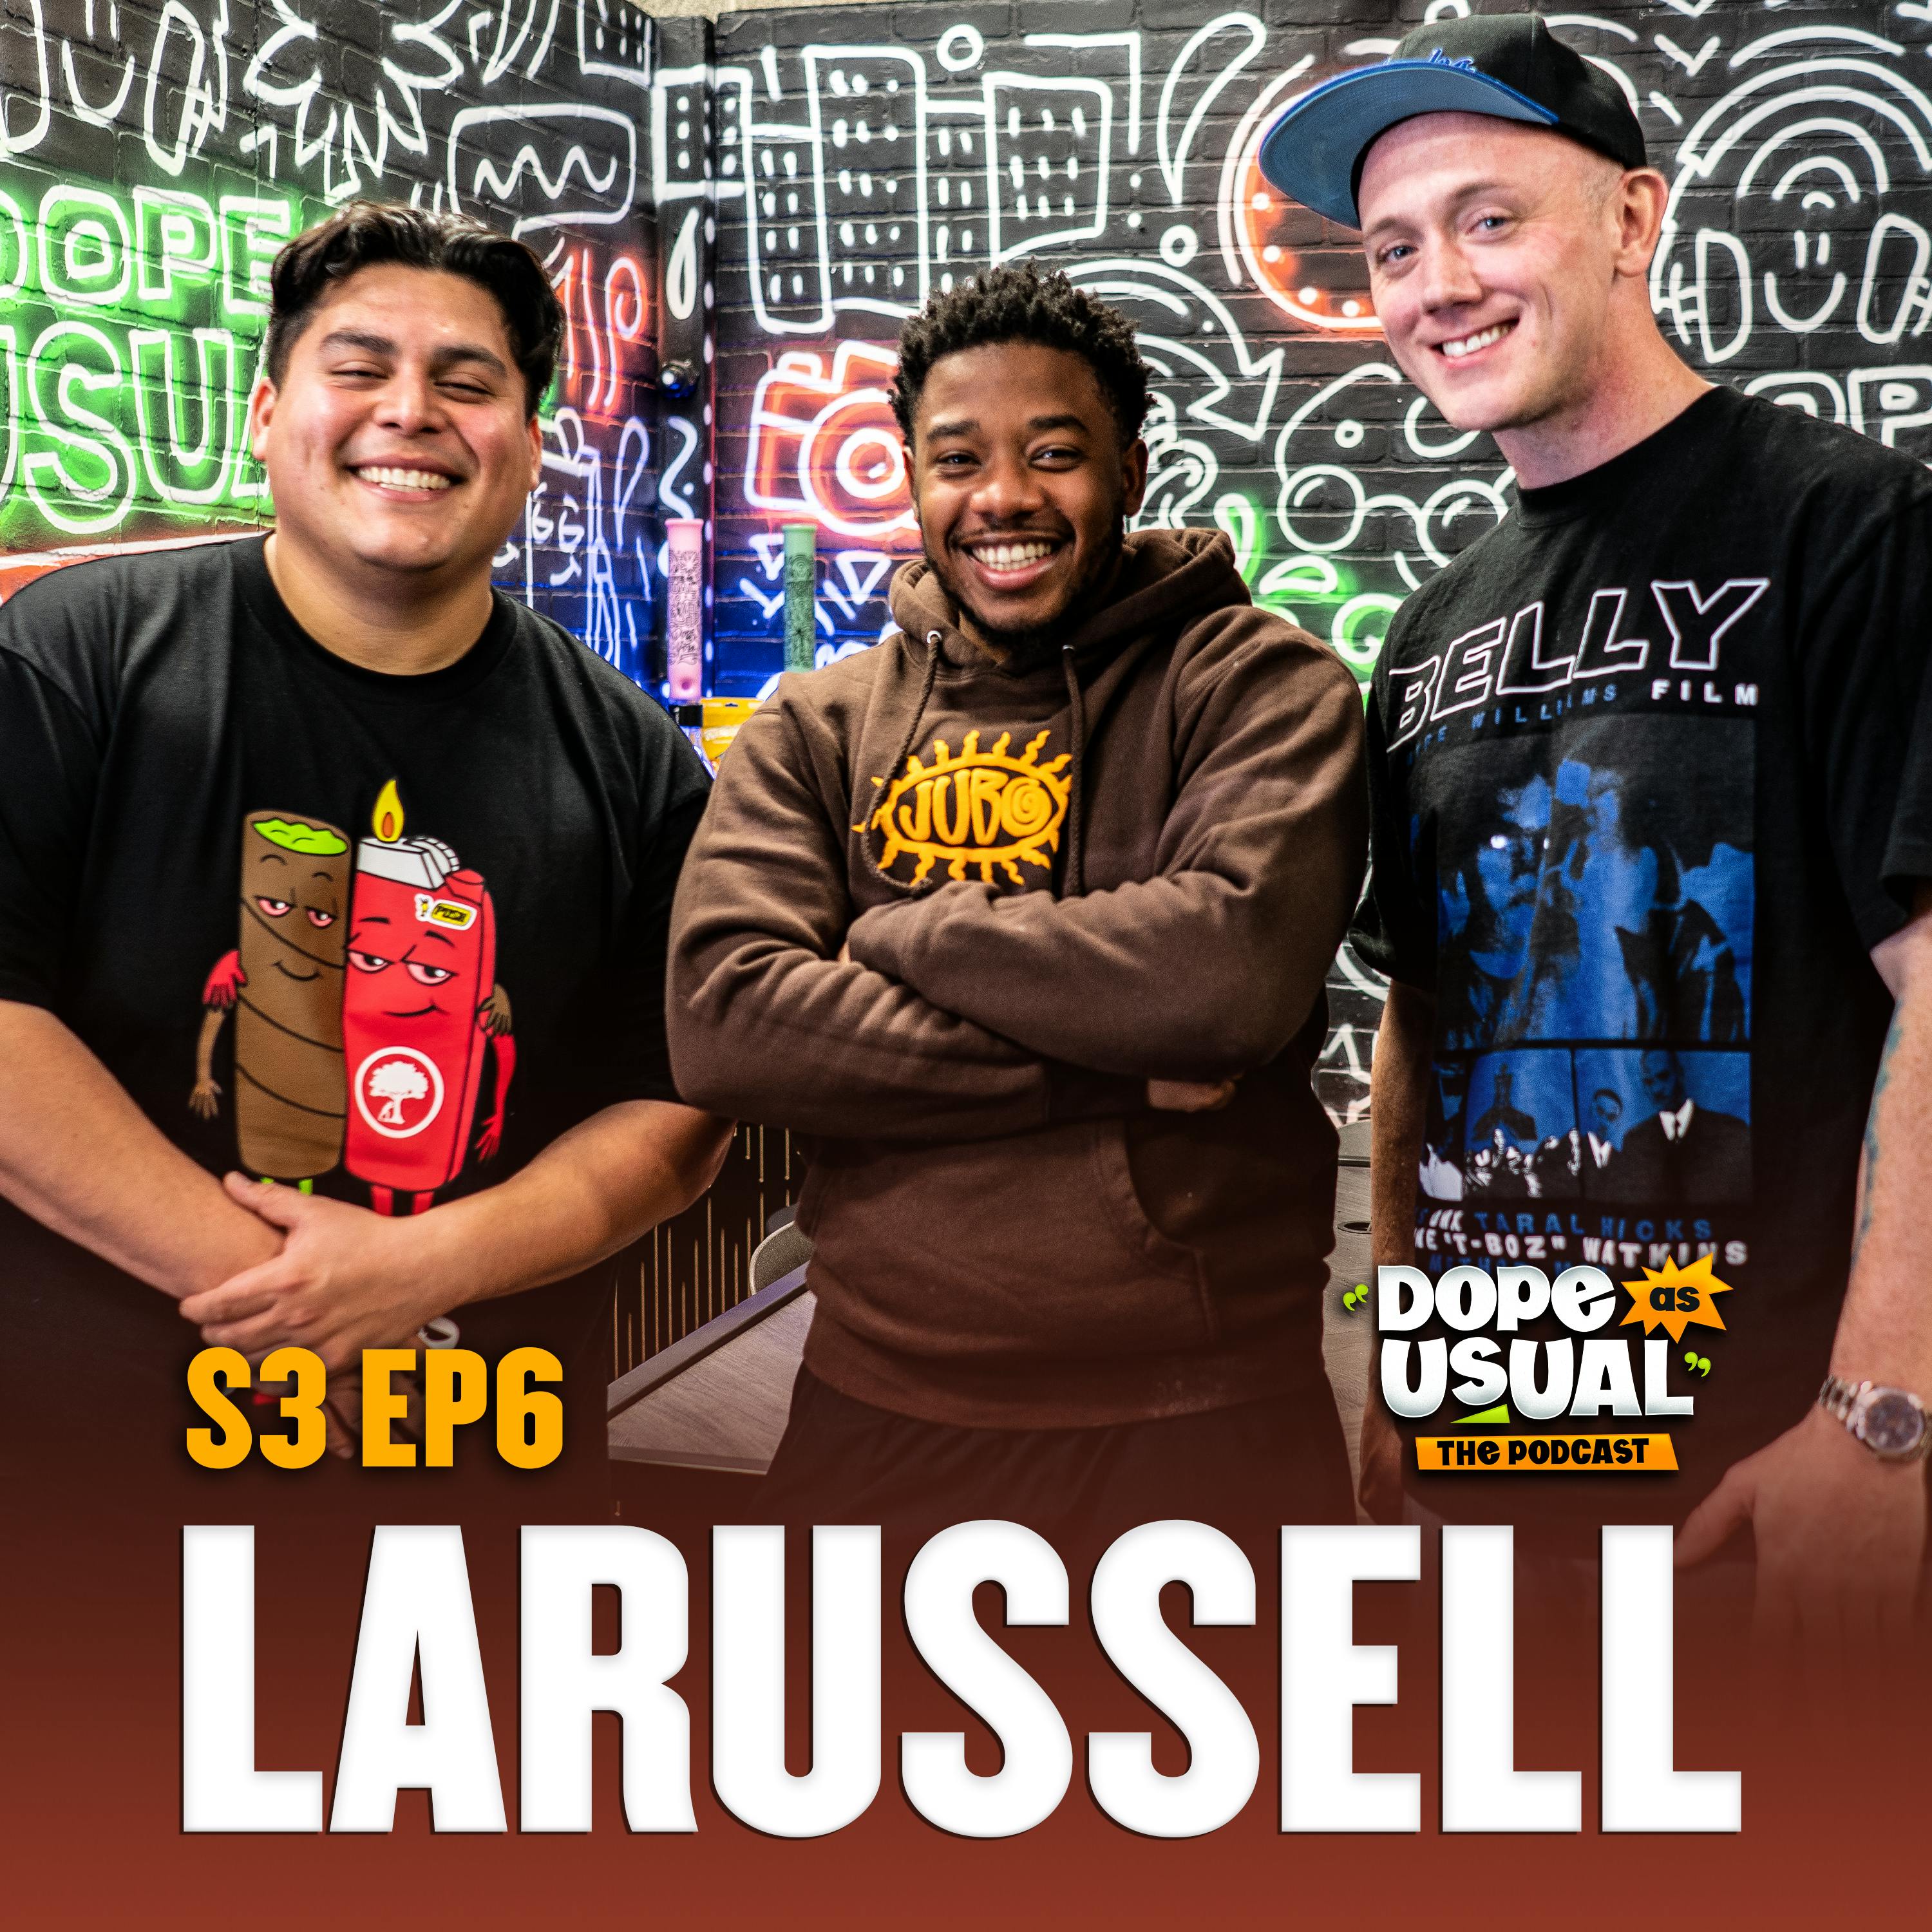 LaRussell Talks Aliens, Rolling Stone & Going Viral